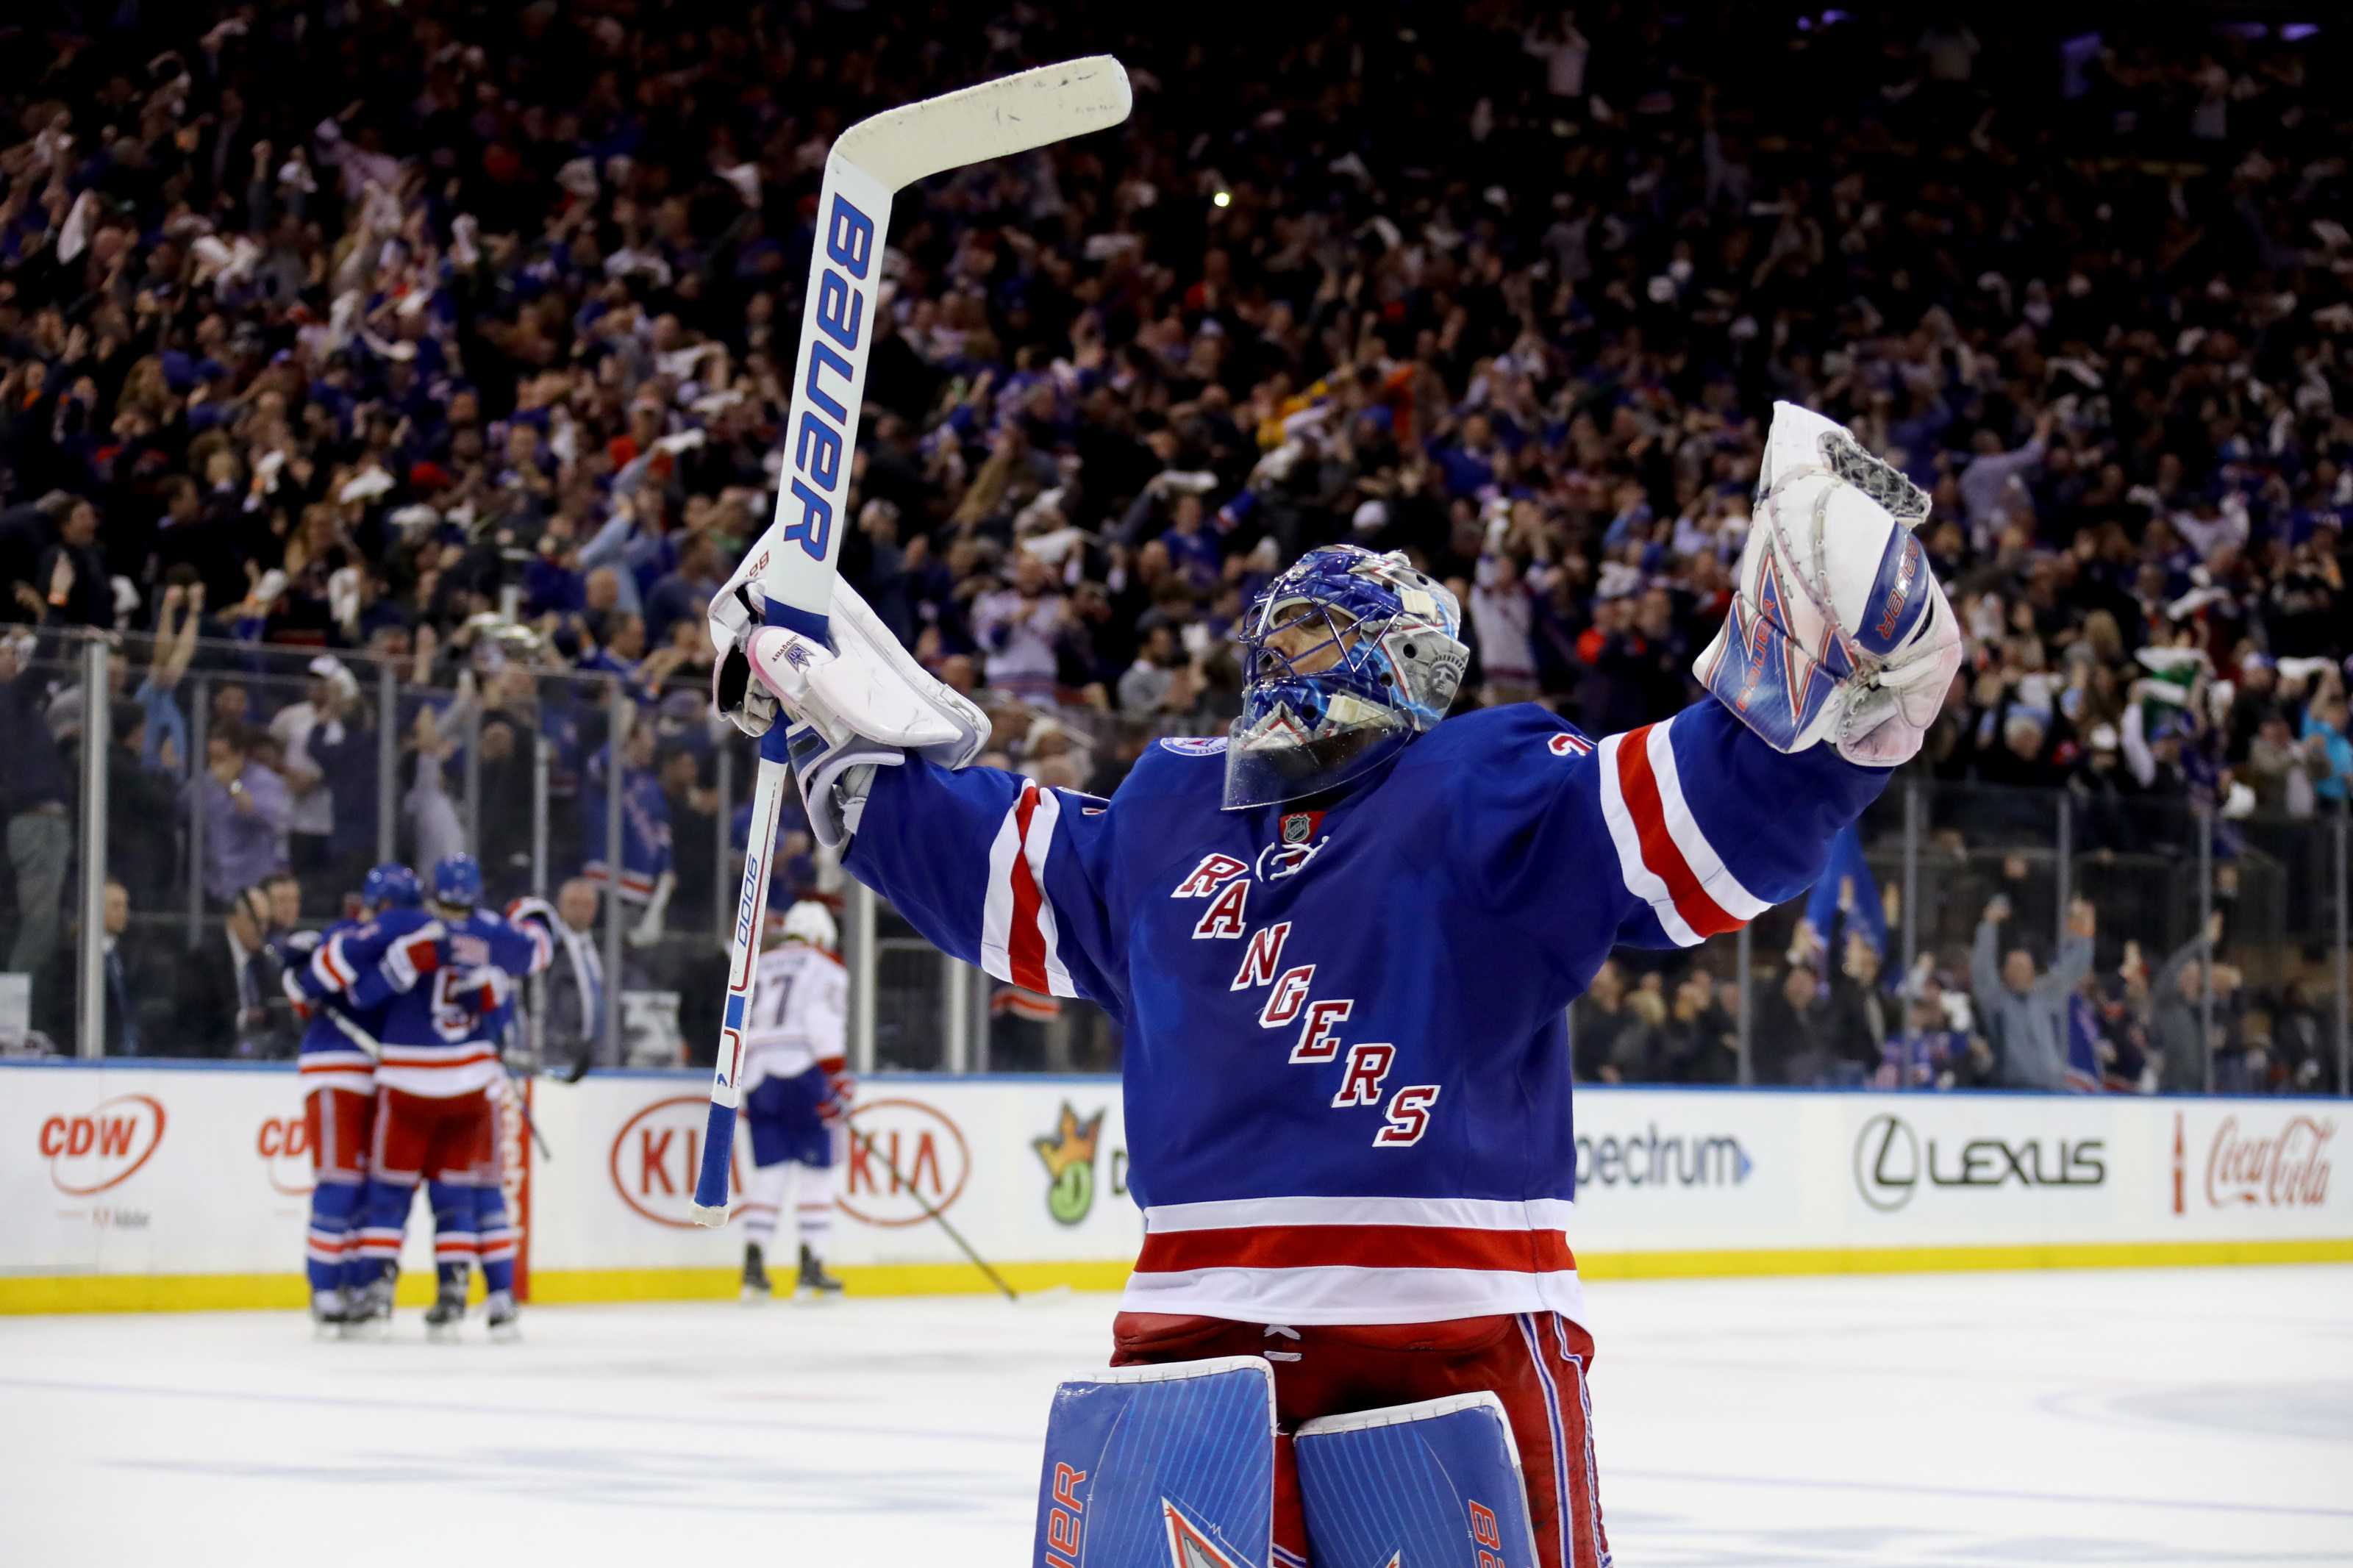 PHOTOS: Rangers' Lundqvist 10th all time in wins